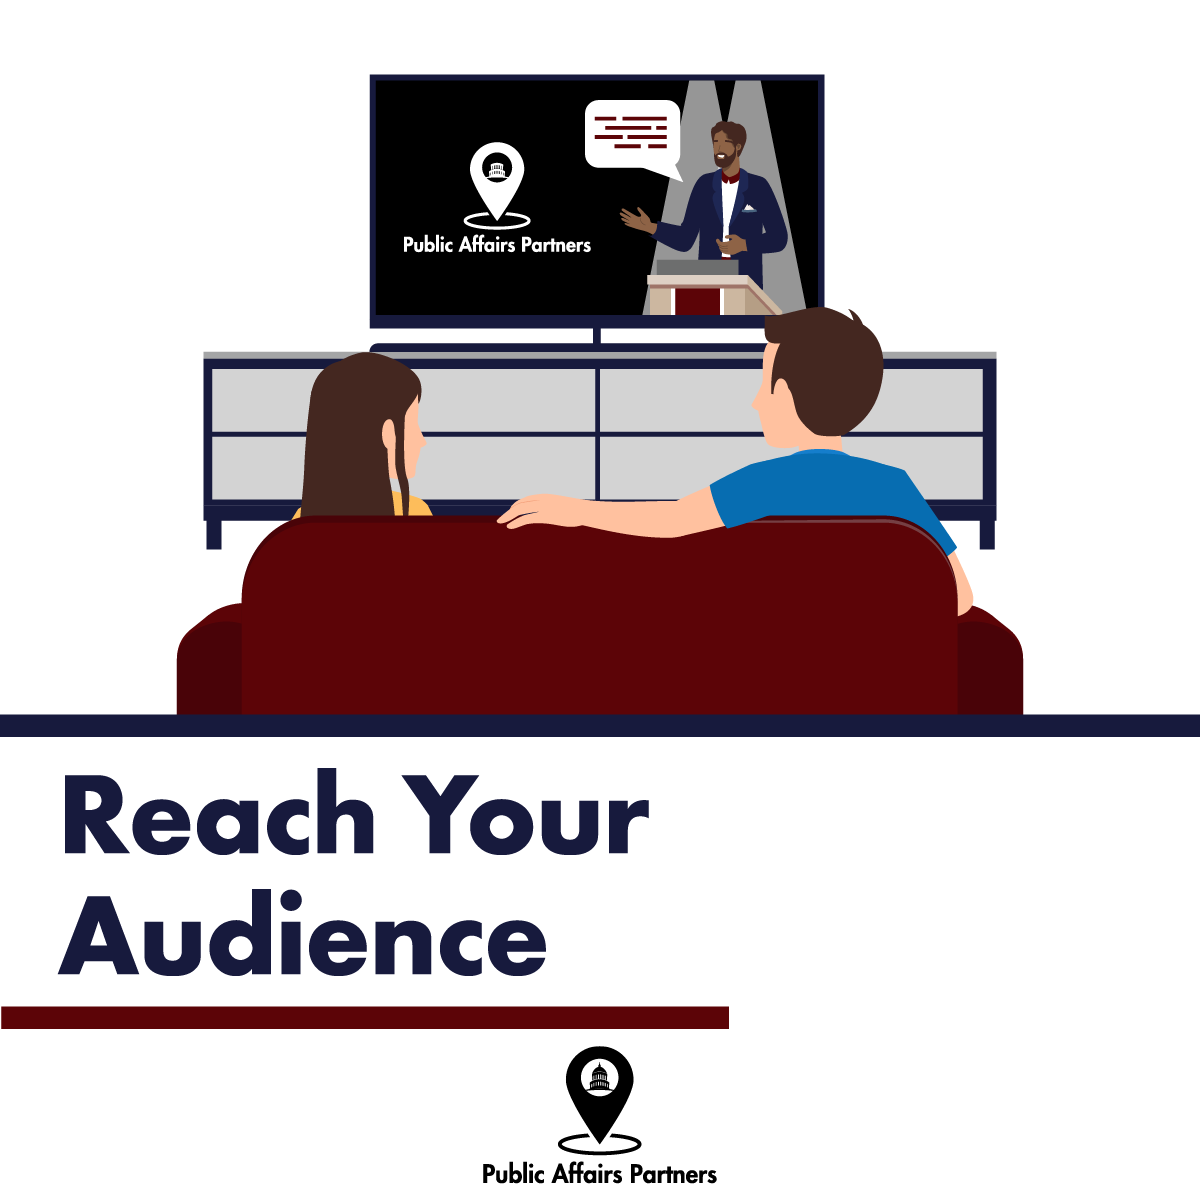 Engage with your target audience now before it's too late. Run a targeted digital ad campaign with us and get your message front and center wherever they go online (even streaming TV). Get started today at PublicAffairsPartners.com

#Technology #PublicAffairs #DigitalAds